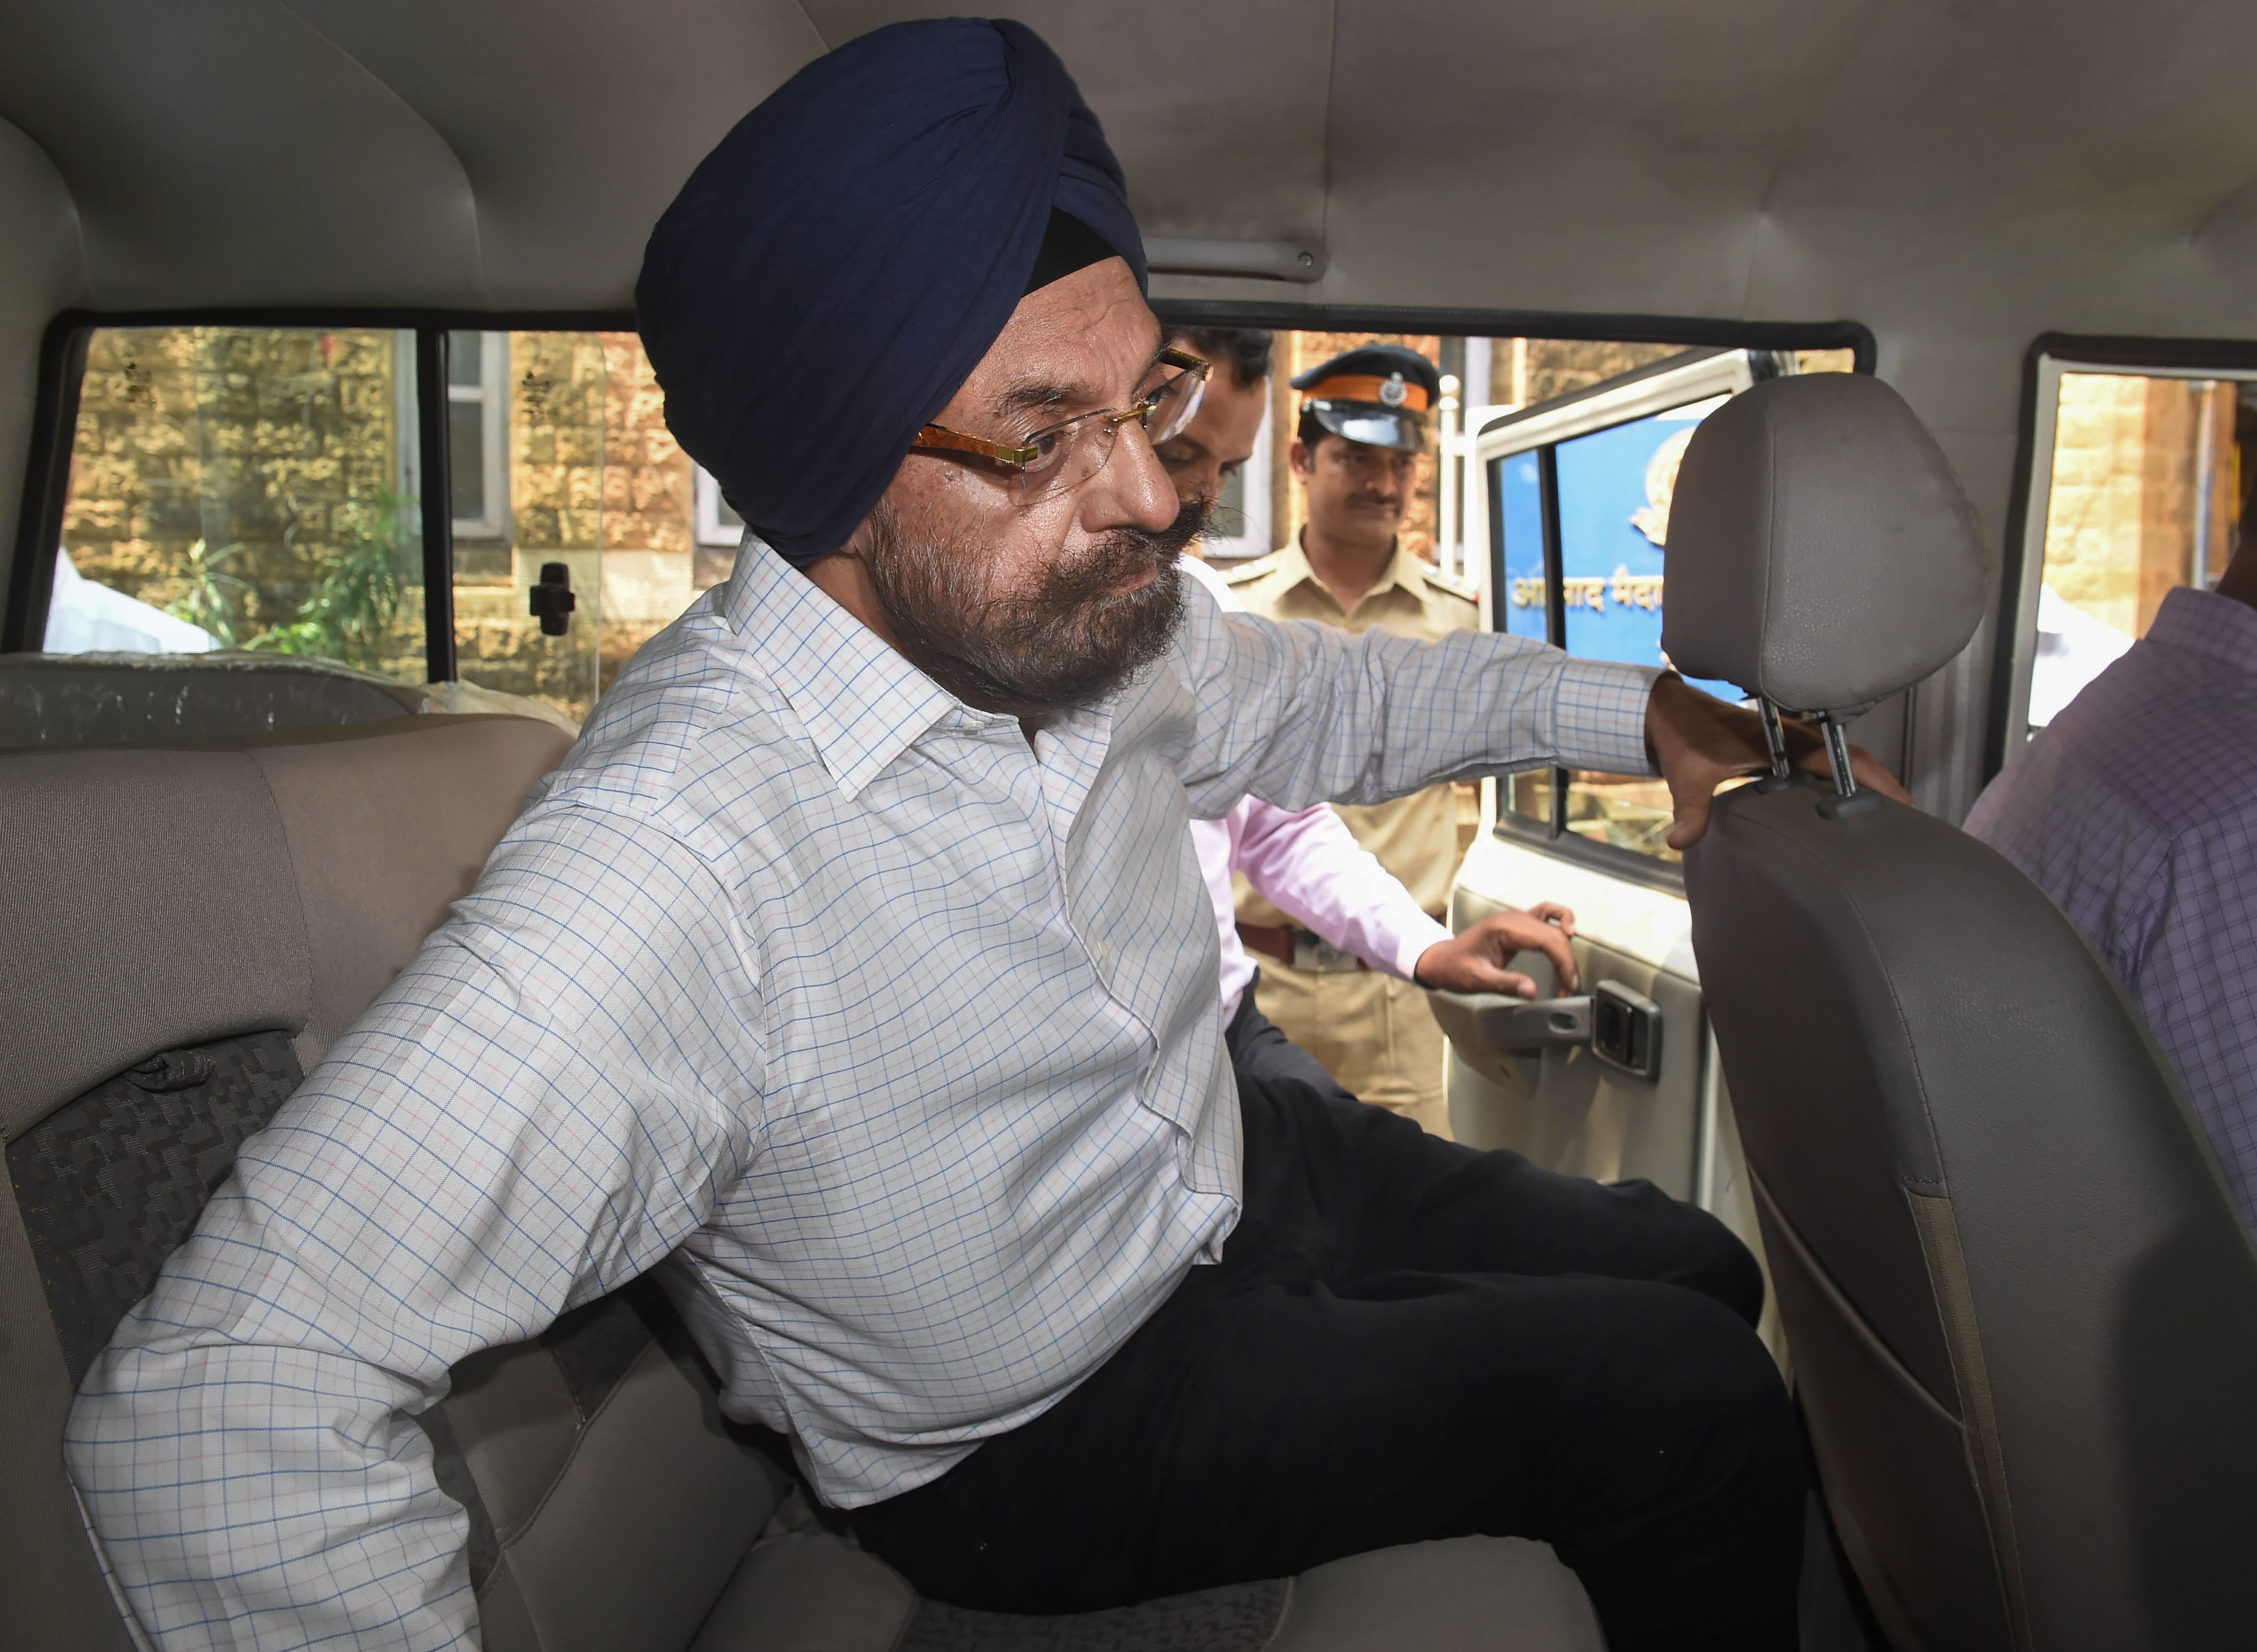 Waryam Singh, former chairman of Punjab and Maharashtra Cooperative (PMC) Bank, arrives a court in connection with the alleged Rs 4,355 crore scam at the bank, in Mumbai, Sunday, October 6, 2019.